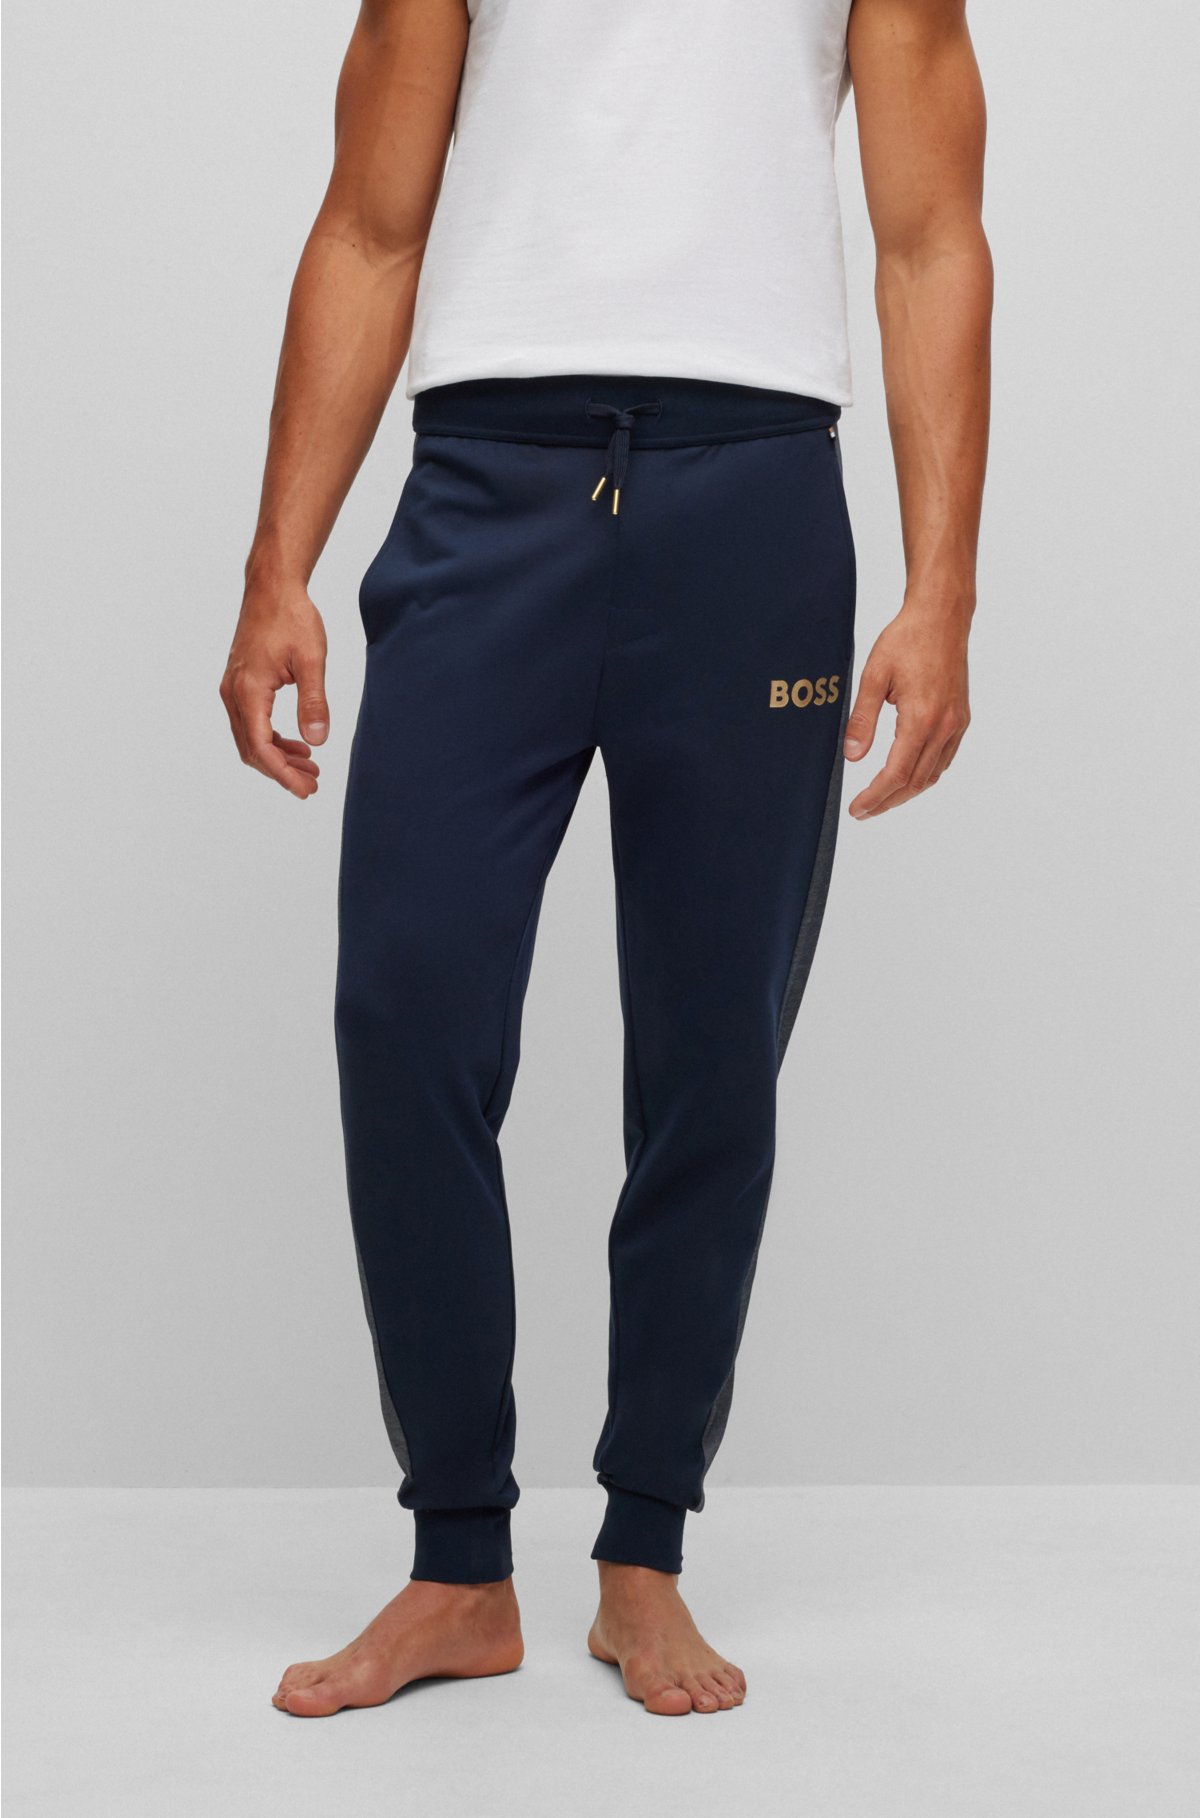 BOSS - logo Sweatpants with embroidered